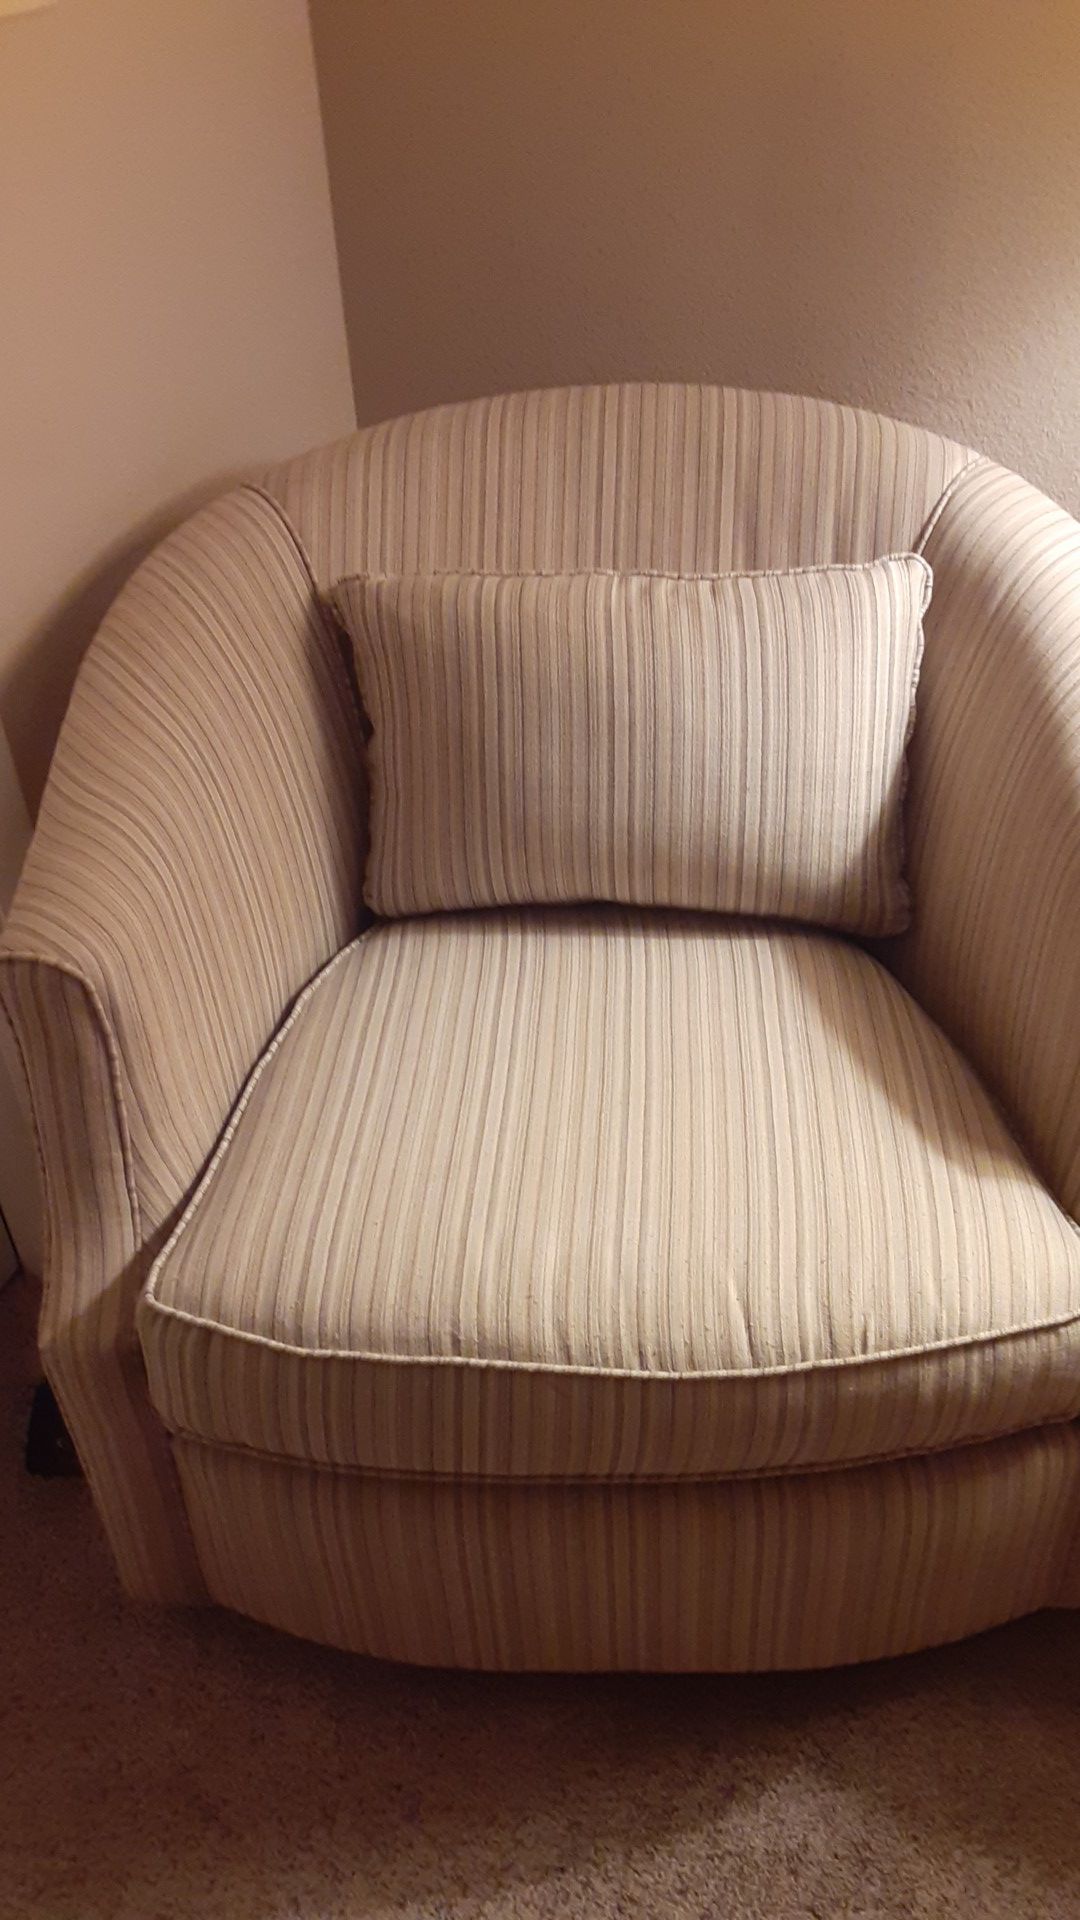 Swivel chair, very comfortable. Good condition!